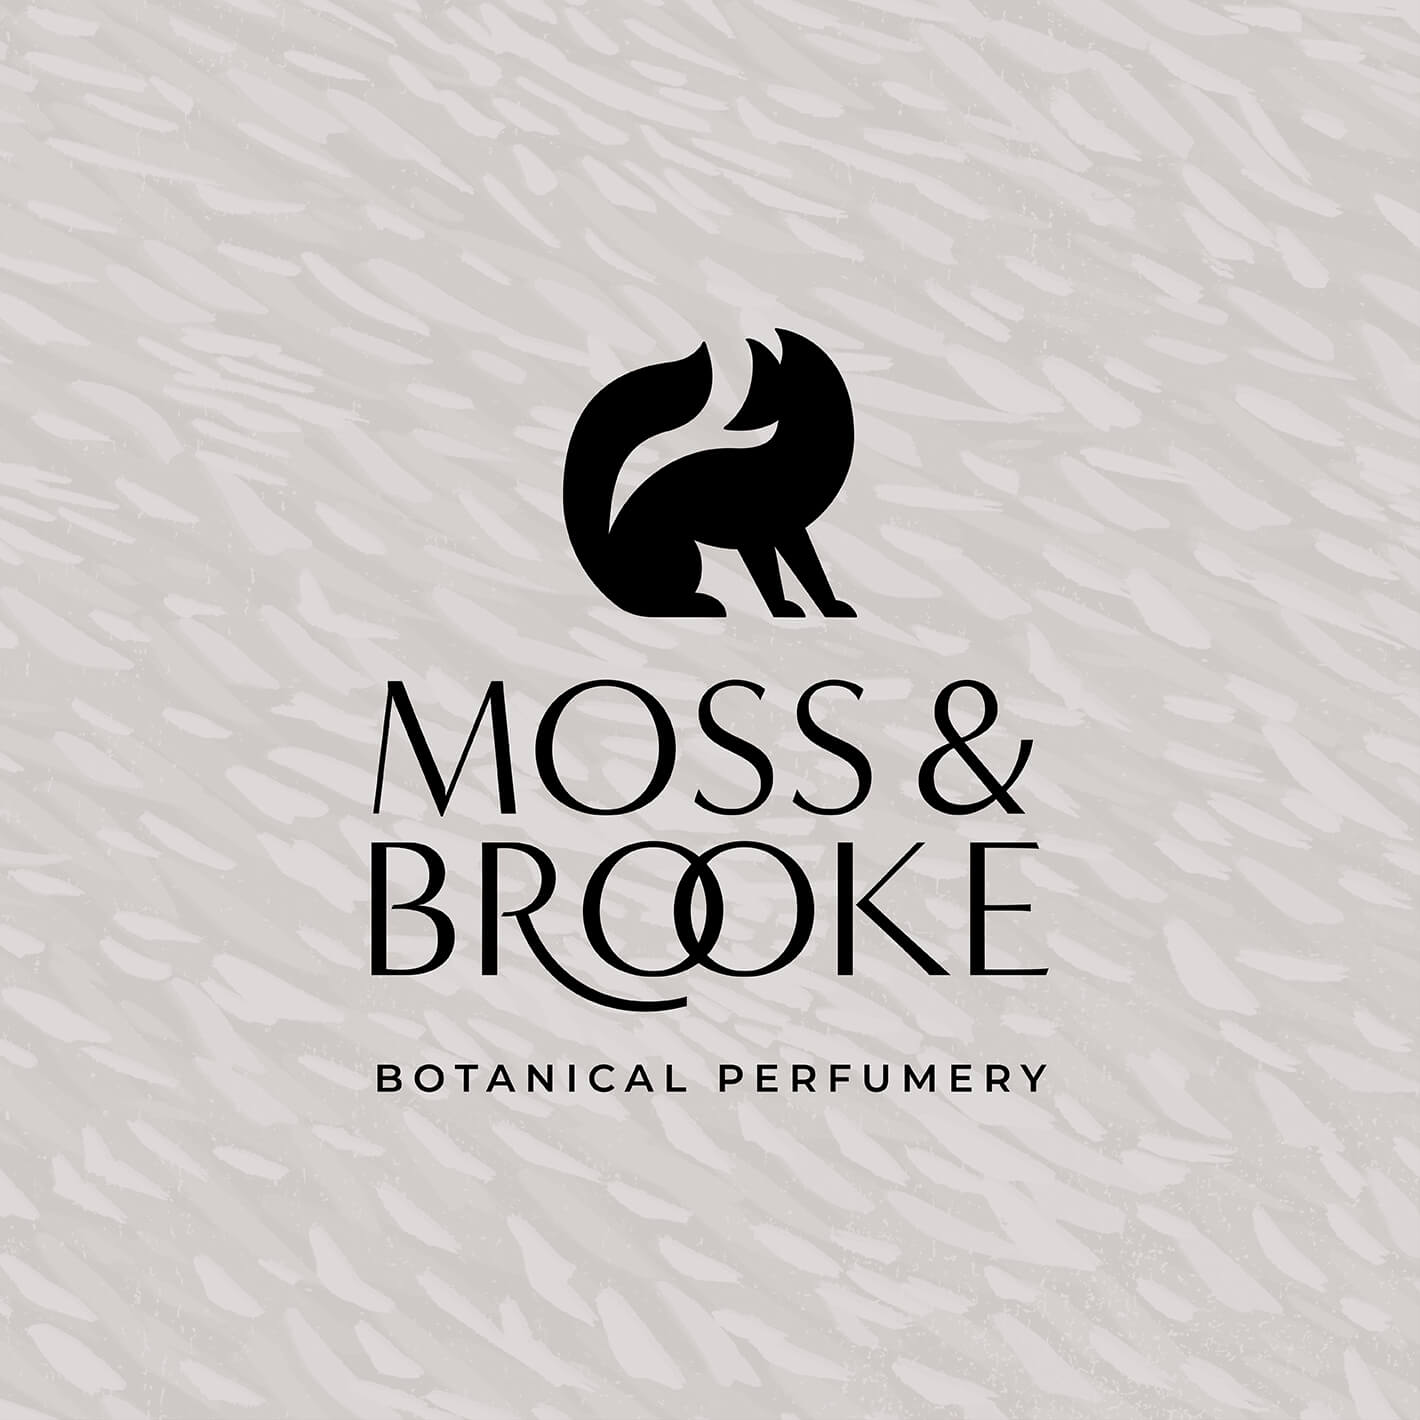 custom linoprint background texture and flexible brand logo created for moss and brooke perfume brand